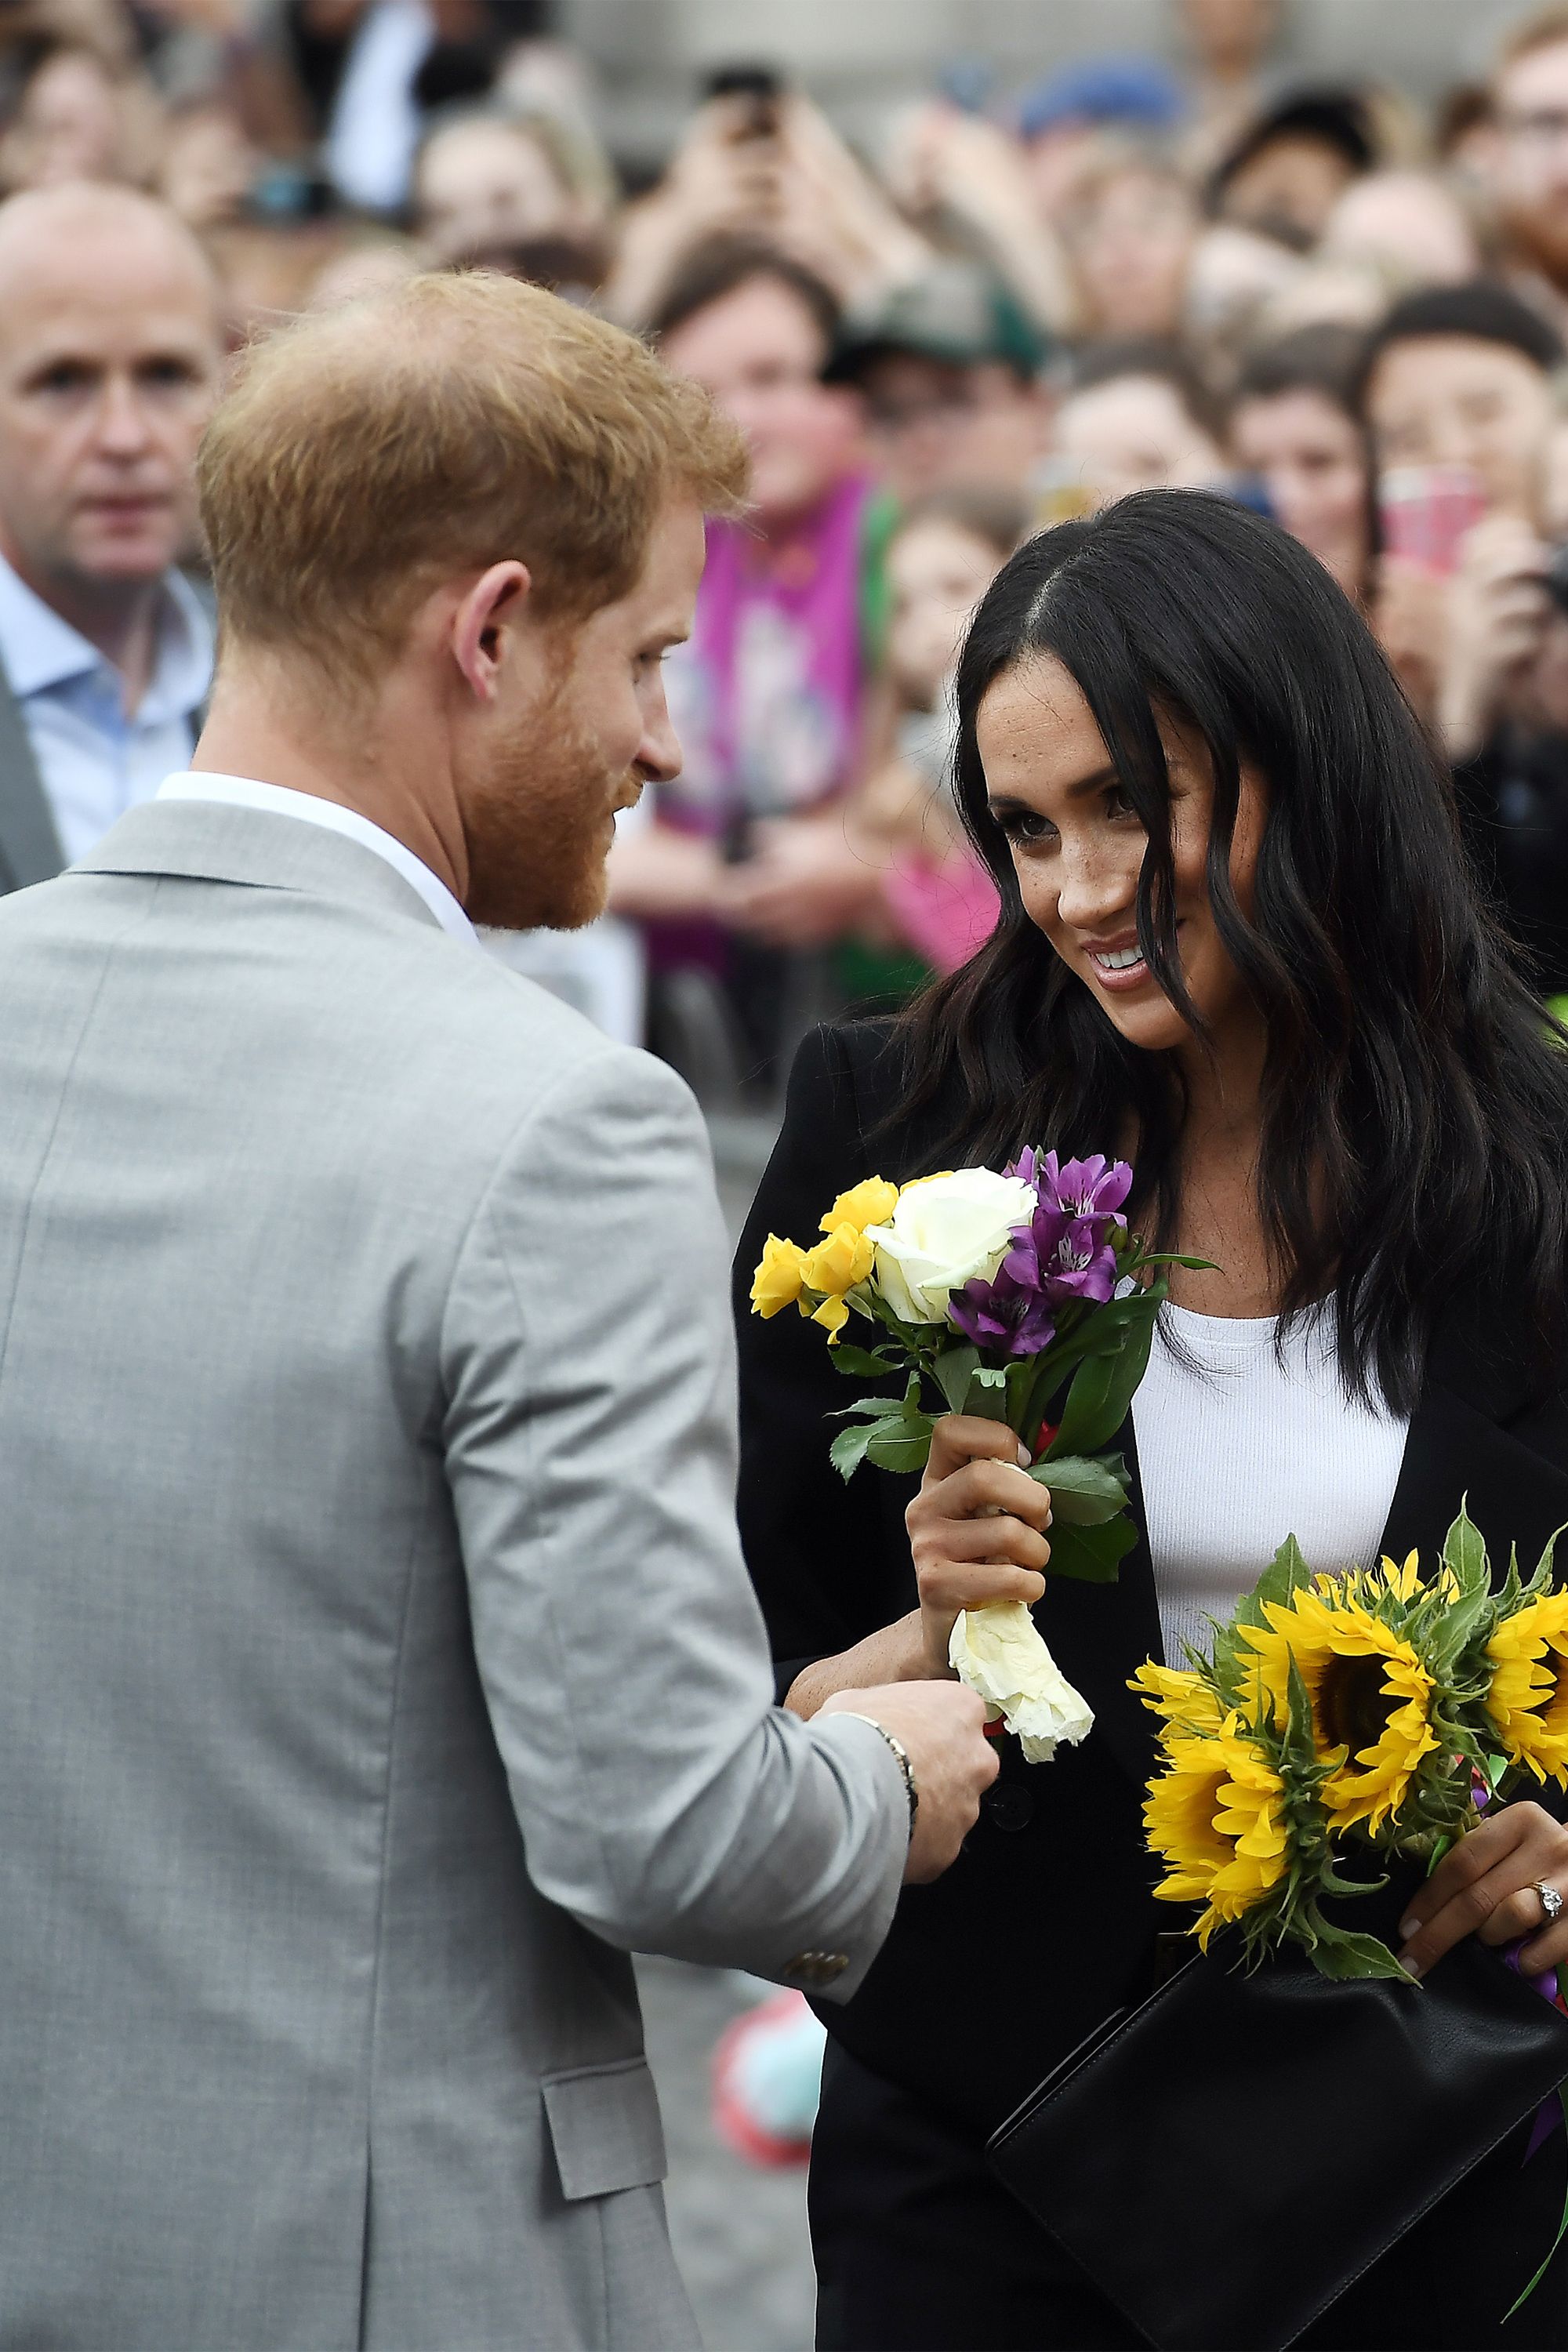 https://hips.hearstapps.com/hmg-prod.s3.amazonaws.com/images/hbz-prince-harry-meghan-markle-cute-moments-2018-07-gettyimages-996145788-1557334673.jpg?crop=1xw:1xh;center,top